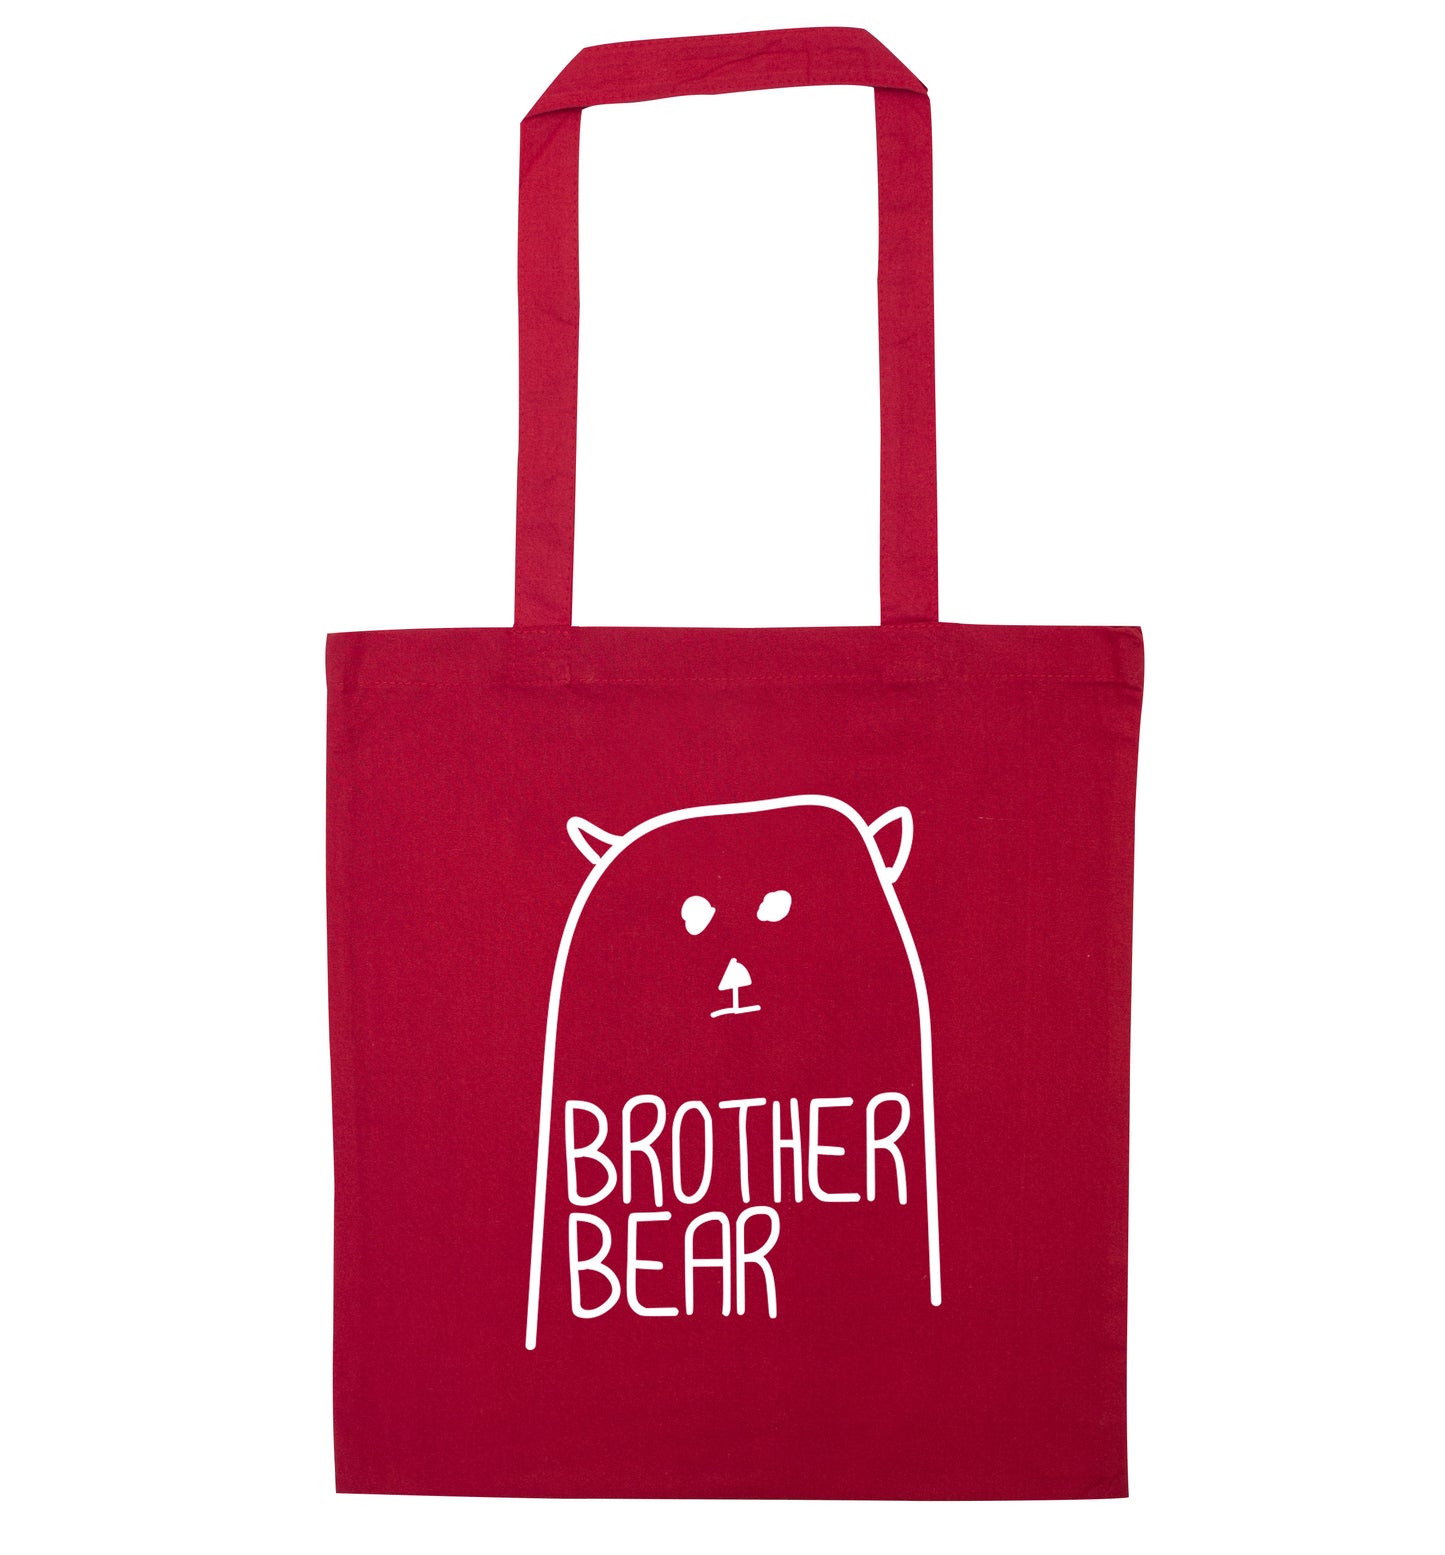 Brother bear red tote bag